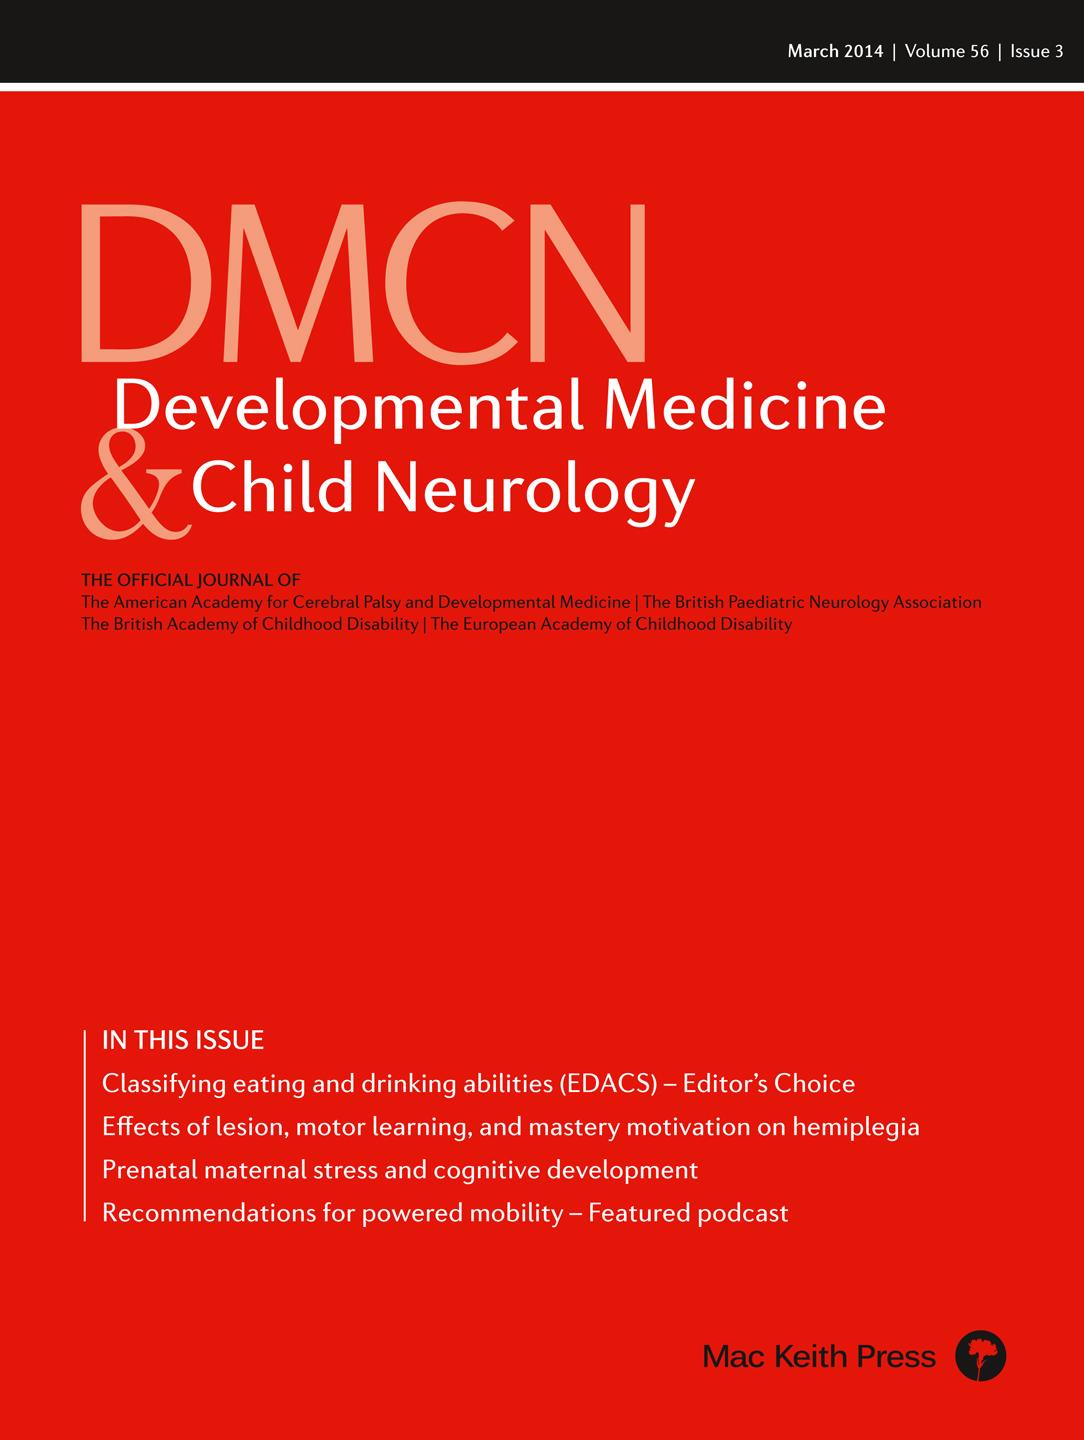 DMCN Discussion: Practice considerations for the introduction and use of power mobility for children